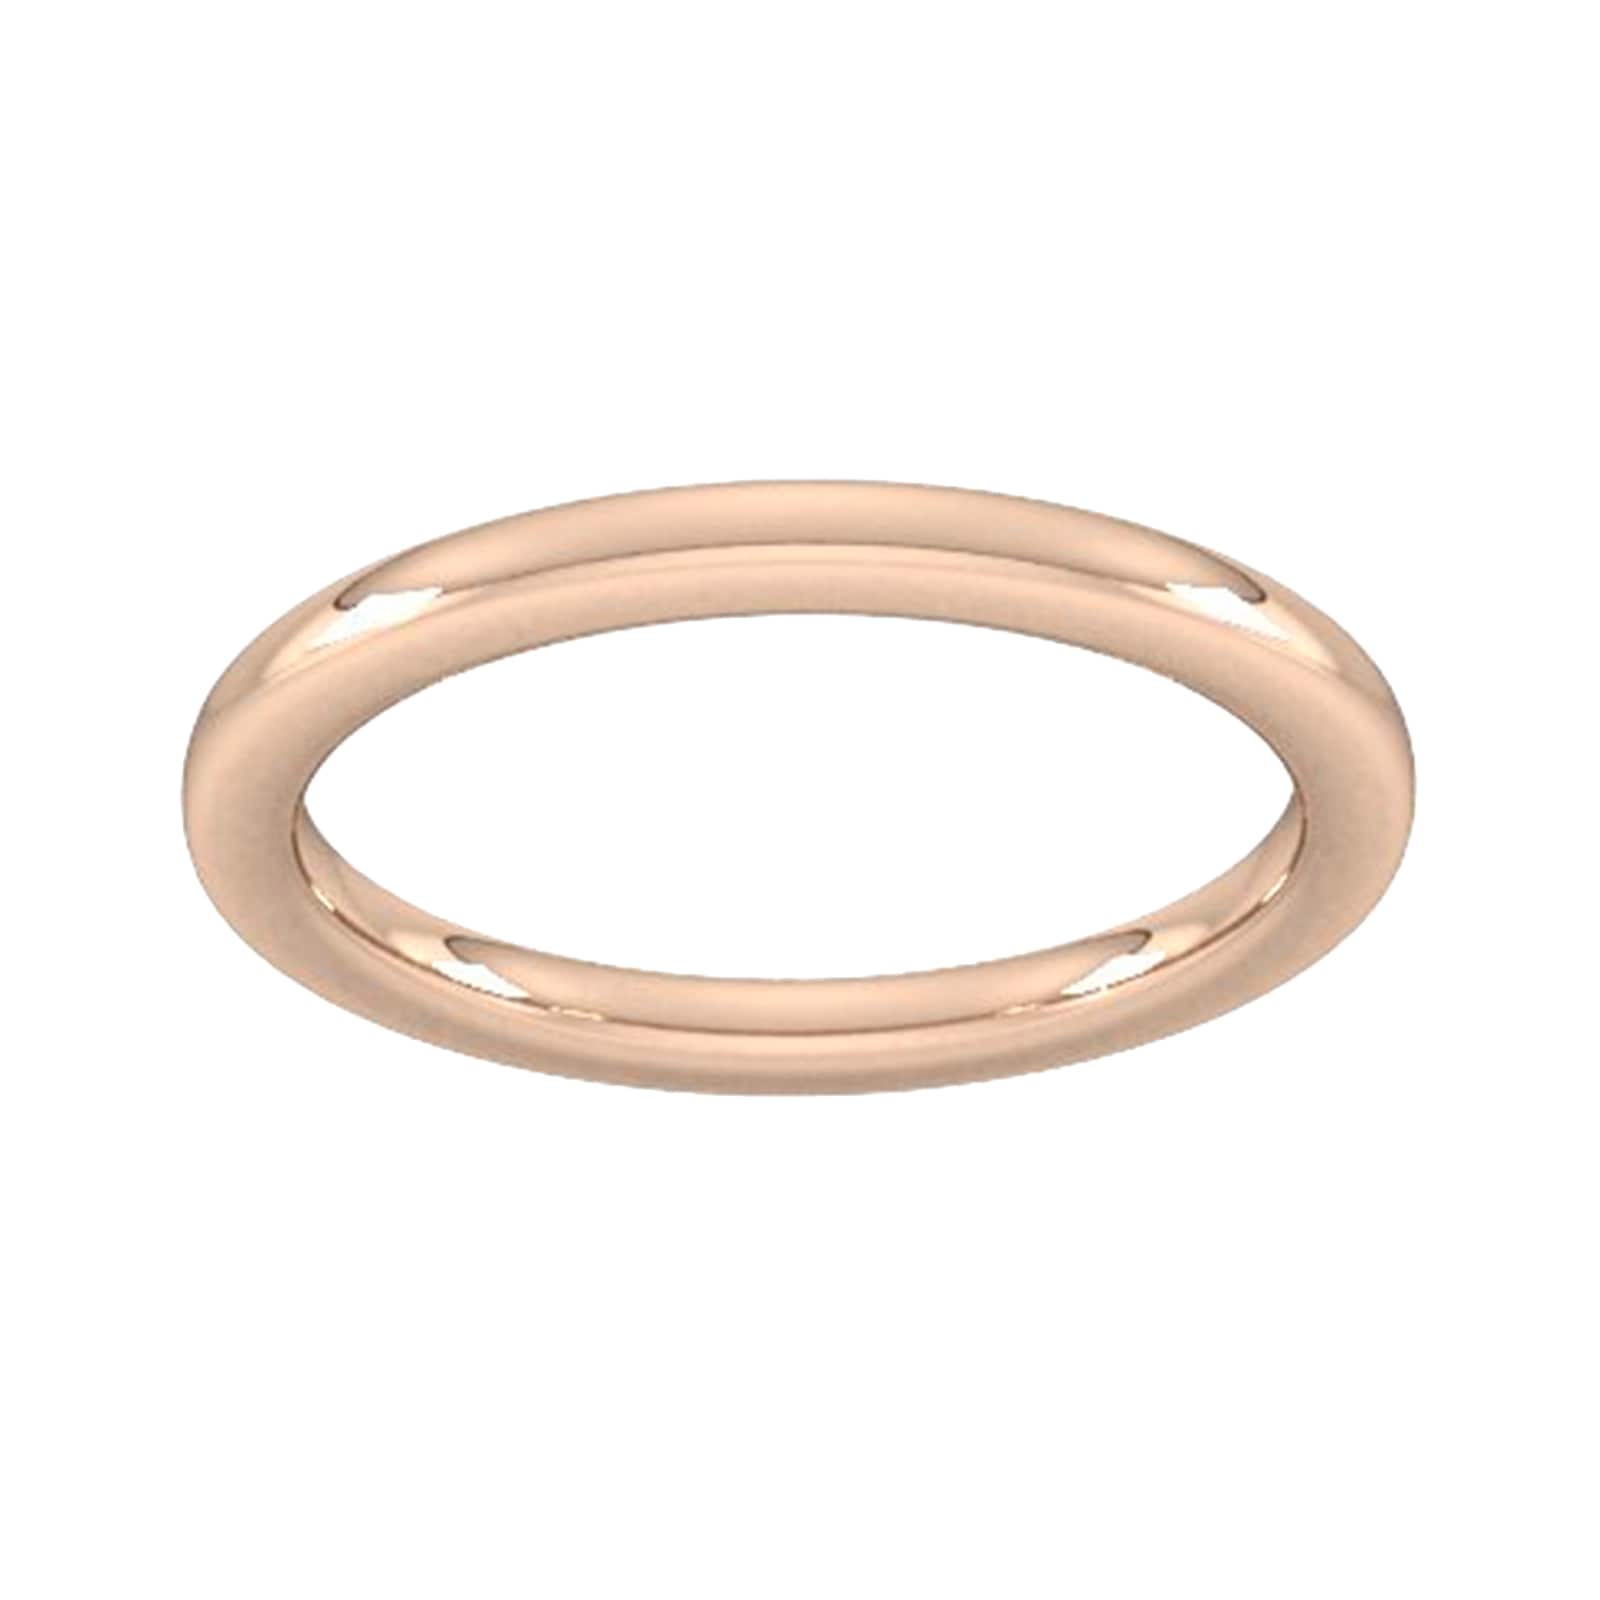 2mm Slight Court Extra Heavy Wedding Ring In 9 Carat Rose Gold - Ring Size Q